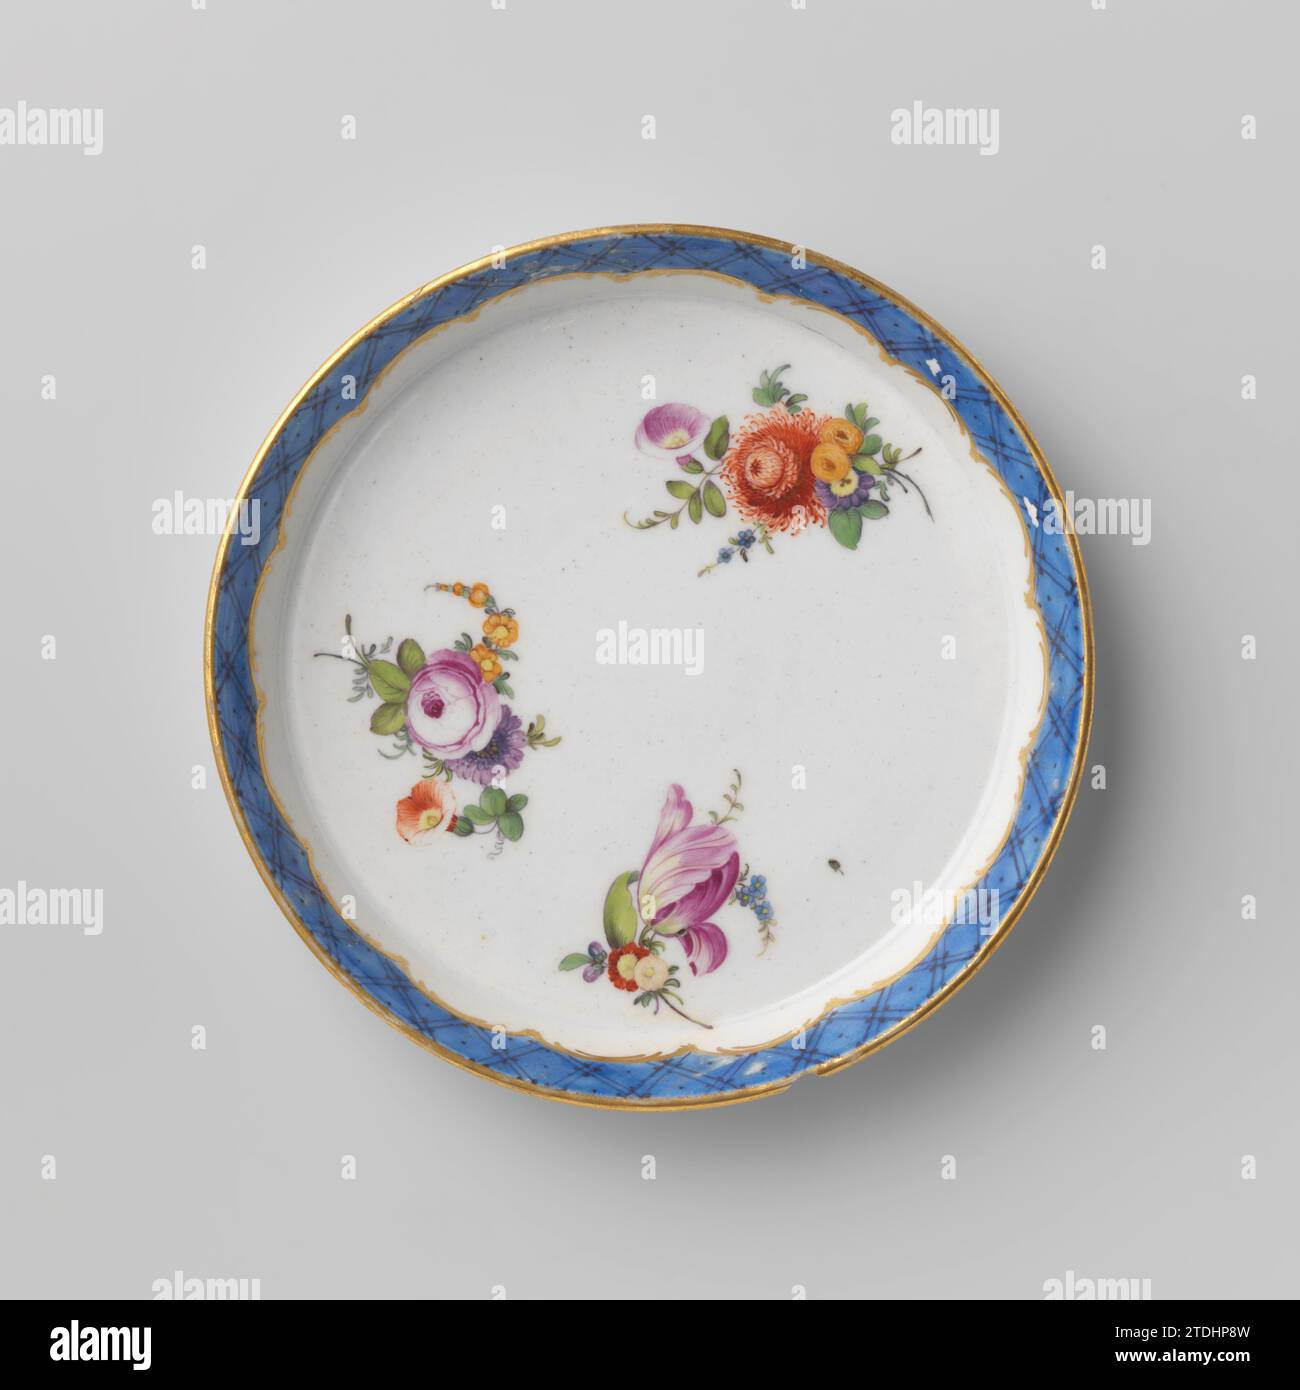 Saucer, painted with three bouquets and servetwork, manufacture Oud-Loosdrecht, c. 1778 - c. 1782 Porcelain dish, multi -colored painted with three bouquets. Along the edges of the saucer blue servetwork between a trim and rocailles in gold. Just above the foot of the dish a golden trim. Loosdrecht porcelain Porcelain dish, multi -colored painted with three bouquets. Along the edges of the saucer blue servetwork between a trim and rocailles in gold. Just above the foot of the dish a golden trim. Loosdrecht porcelain Stock Photo